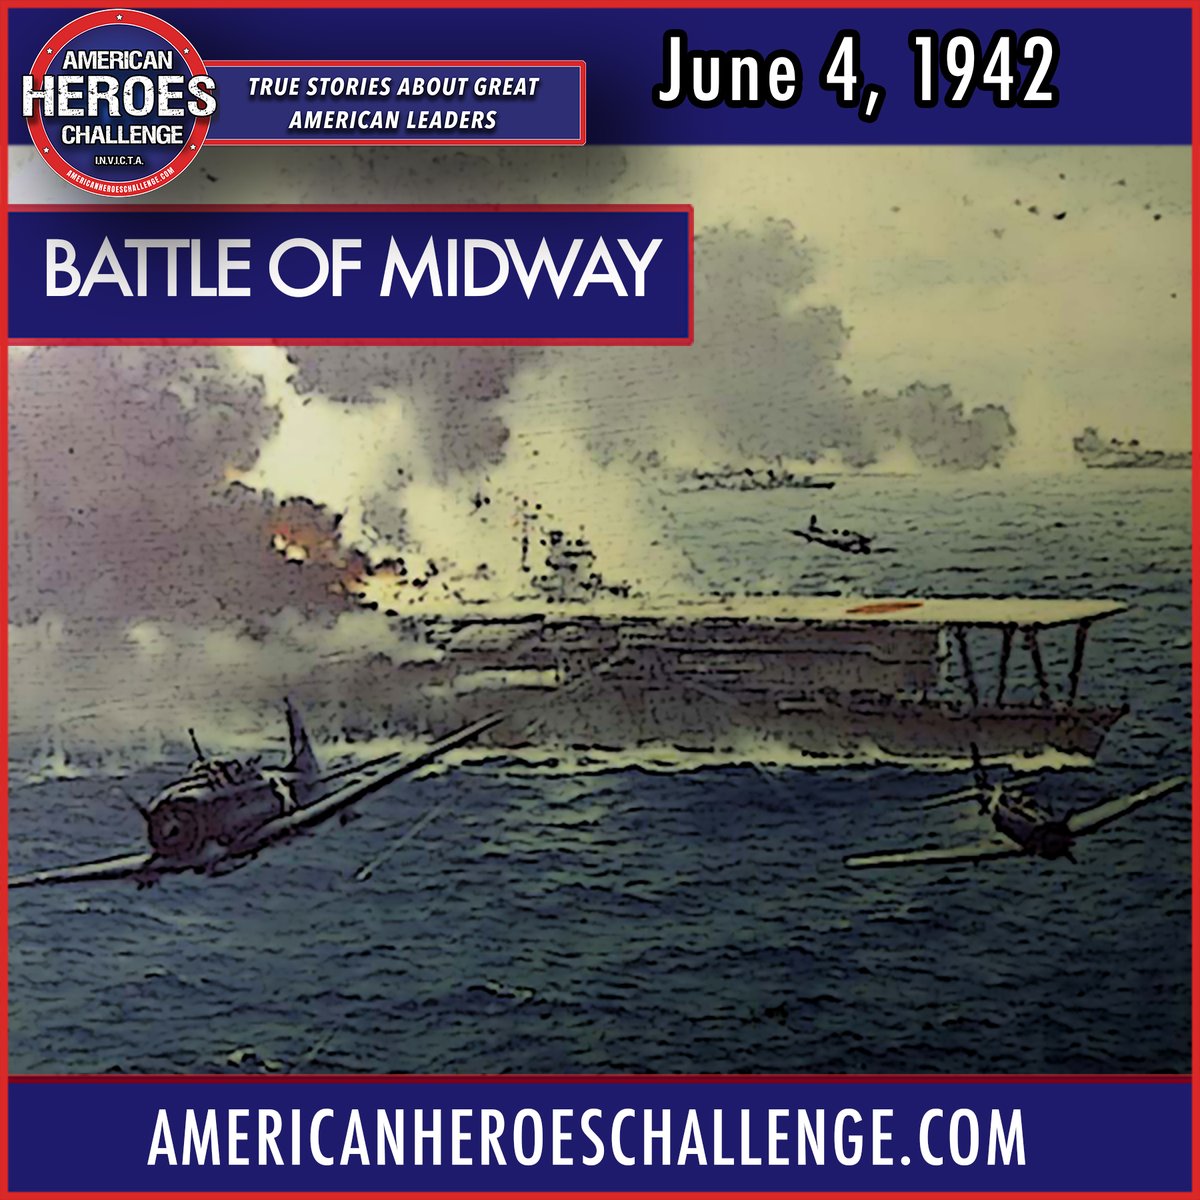 Battle of Midway, June 4-7, 1942 World War II turning point, six months after Pearl Harbor. 307 Americans killed in action, including three prisoners, Ensign Wesley Osmus, Yorktown pilot, Ensign Frank O'Flaherty, flying off the Enterprise and Aviation Machinist's Mate Bruno Peter…